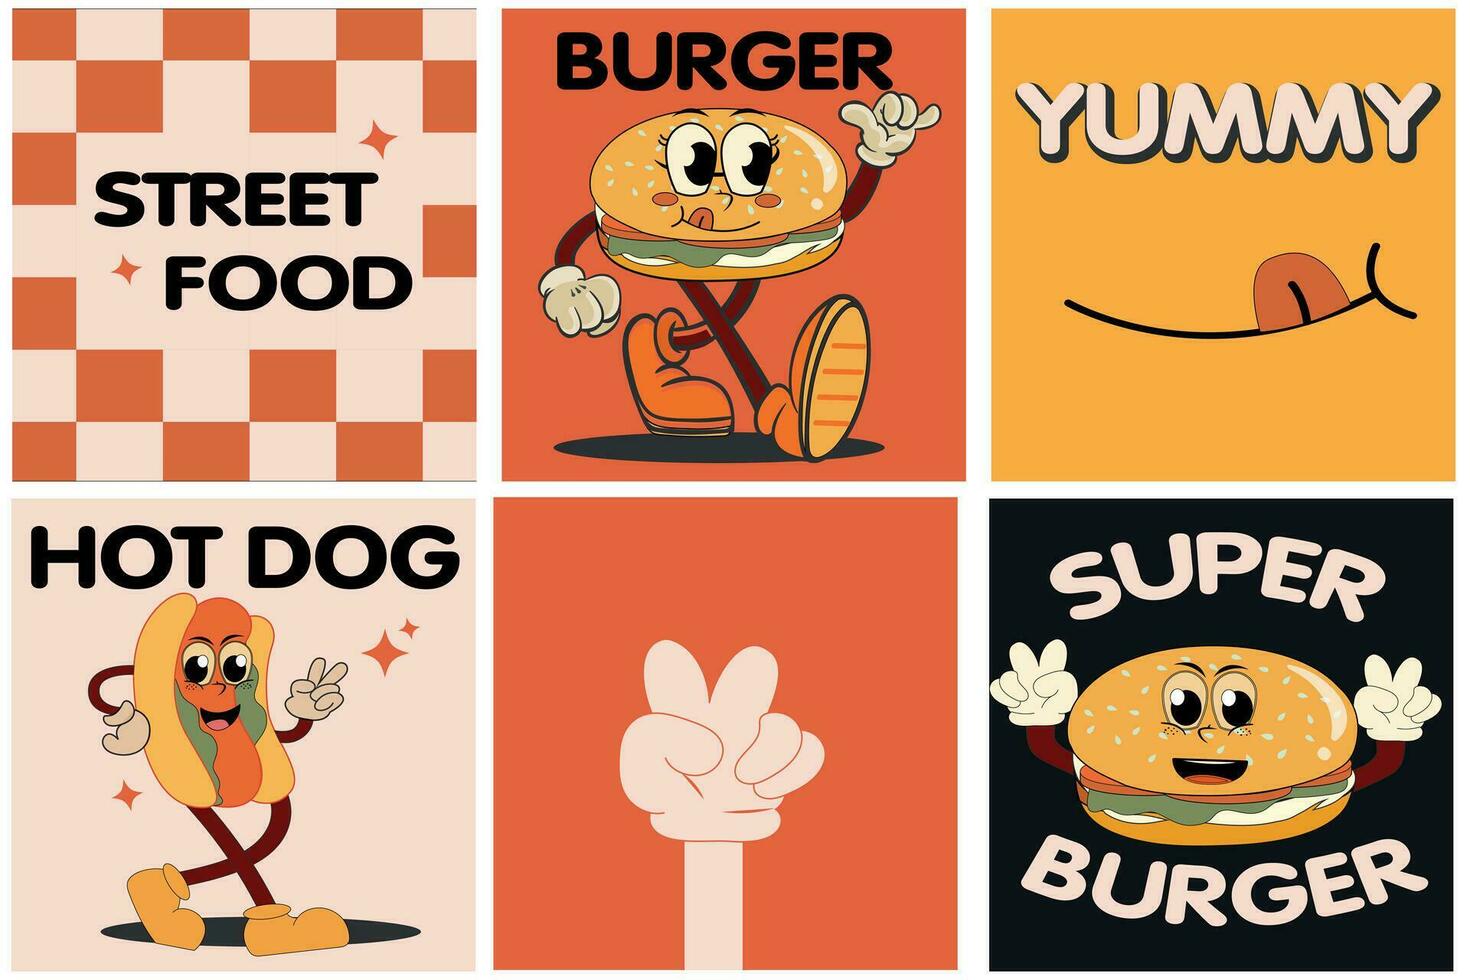 Burger retro cartoon fast food posters and cards. Comic character slogan quote and other elements for burger bar restaurant. Social media templates stories posts. Vector illustration